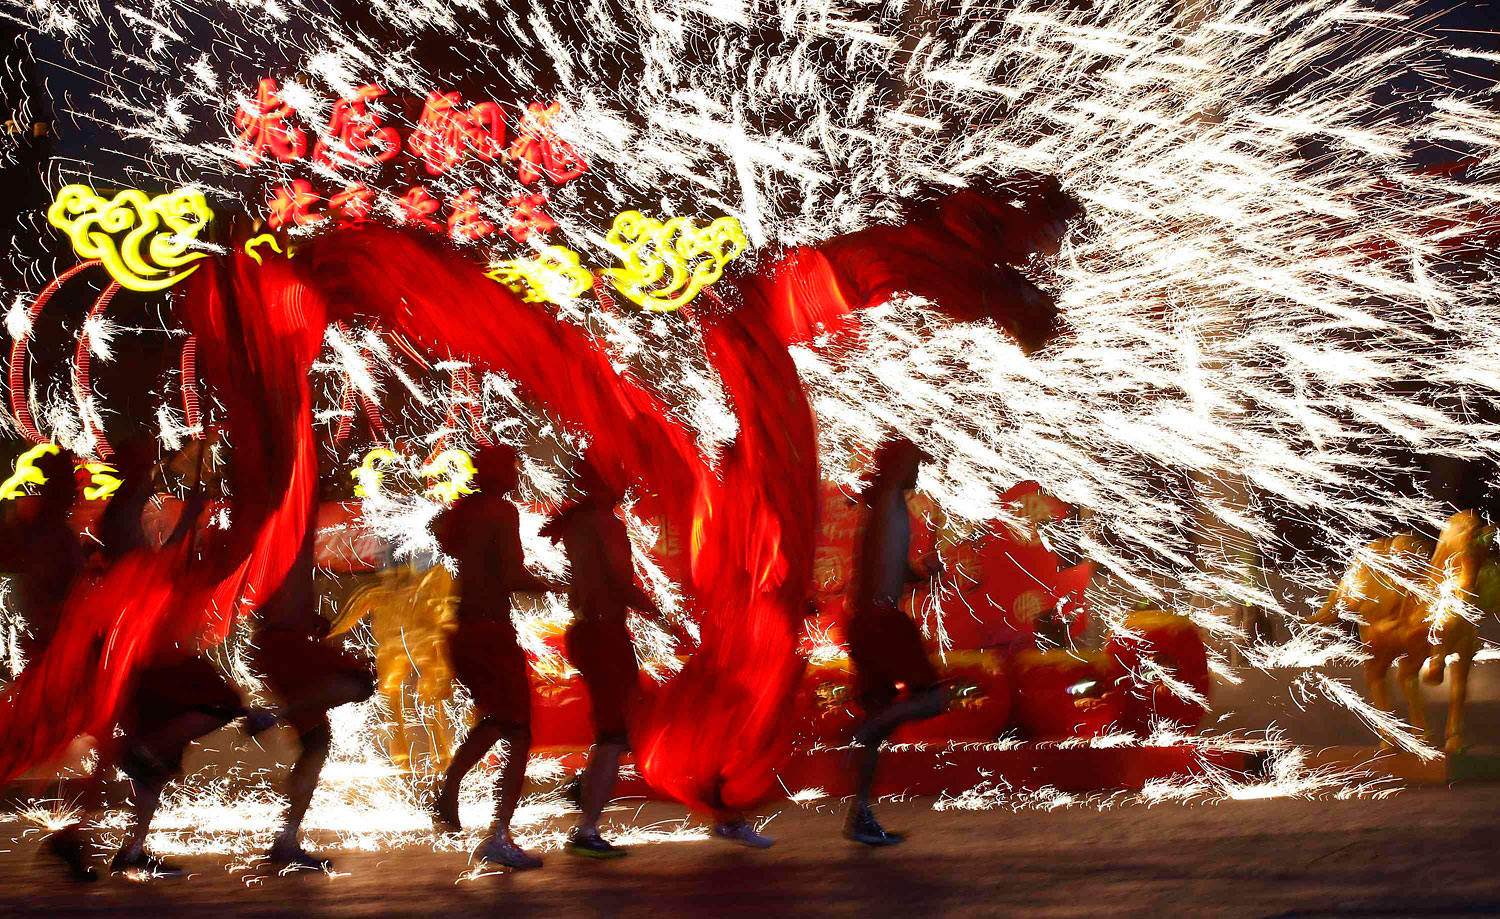 Dancers perform a fire dragon dance in the shower of molten iron spewing firework-like sparks during a folk art performance to celebrate the traditional Chinese Spring Festival on the first day of the Chinese Lunar New Year, which welcomes the Year of the Horse, at the Happy Valley amusement park in Beijing January 31, 2014. REUTERS/Kim Kyung-Hoon (CHINA - Tags: ANNIVERSARY SOCIETY TPX IMAGES OF THE DAY)